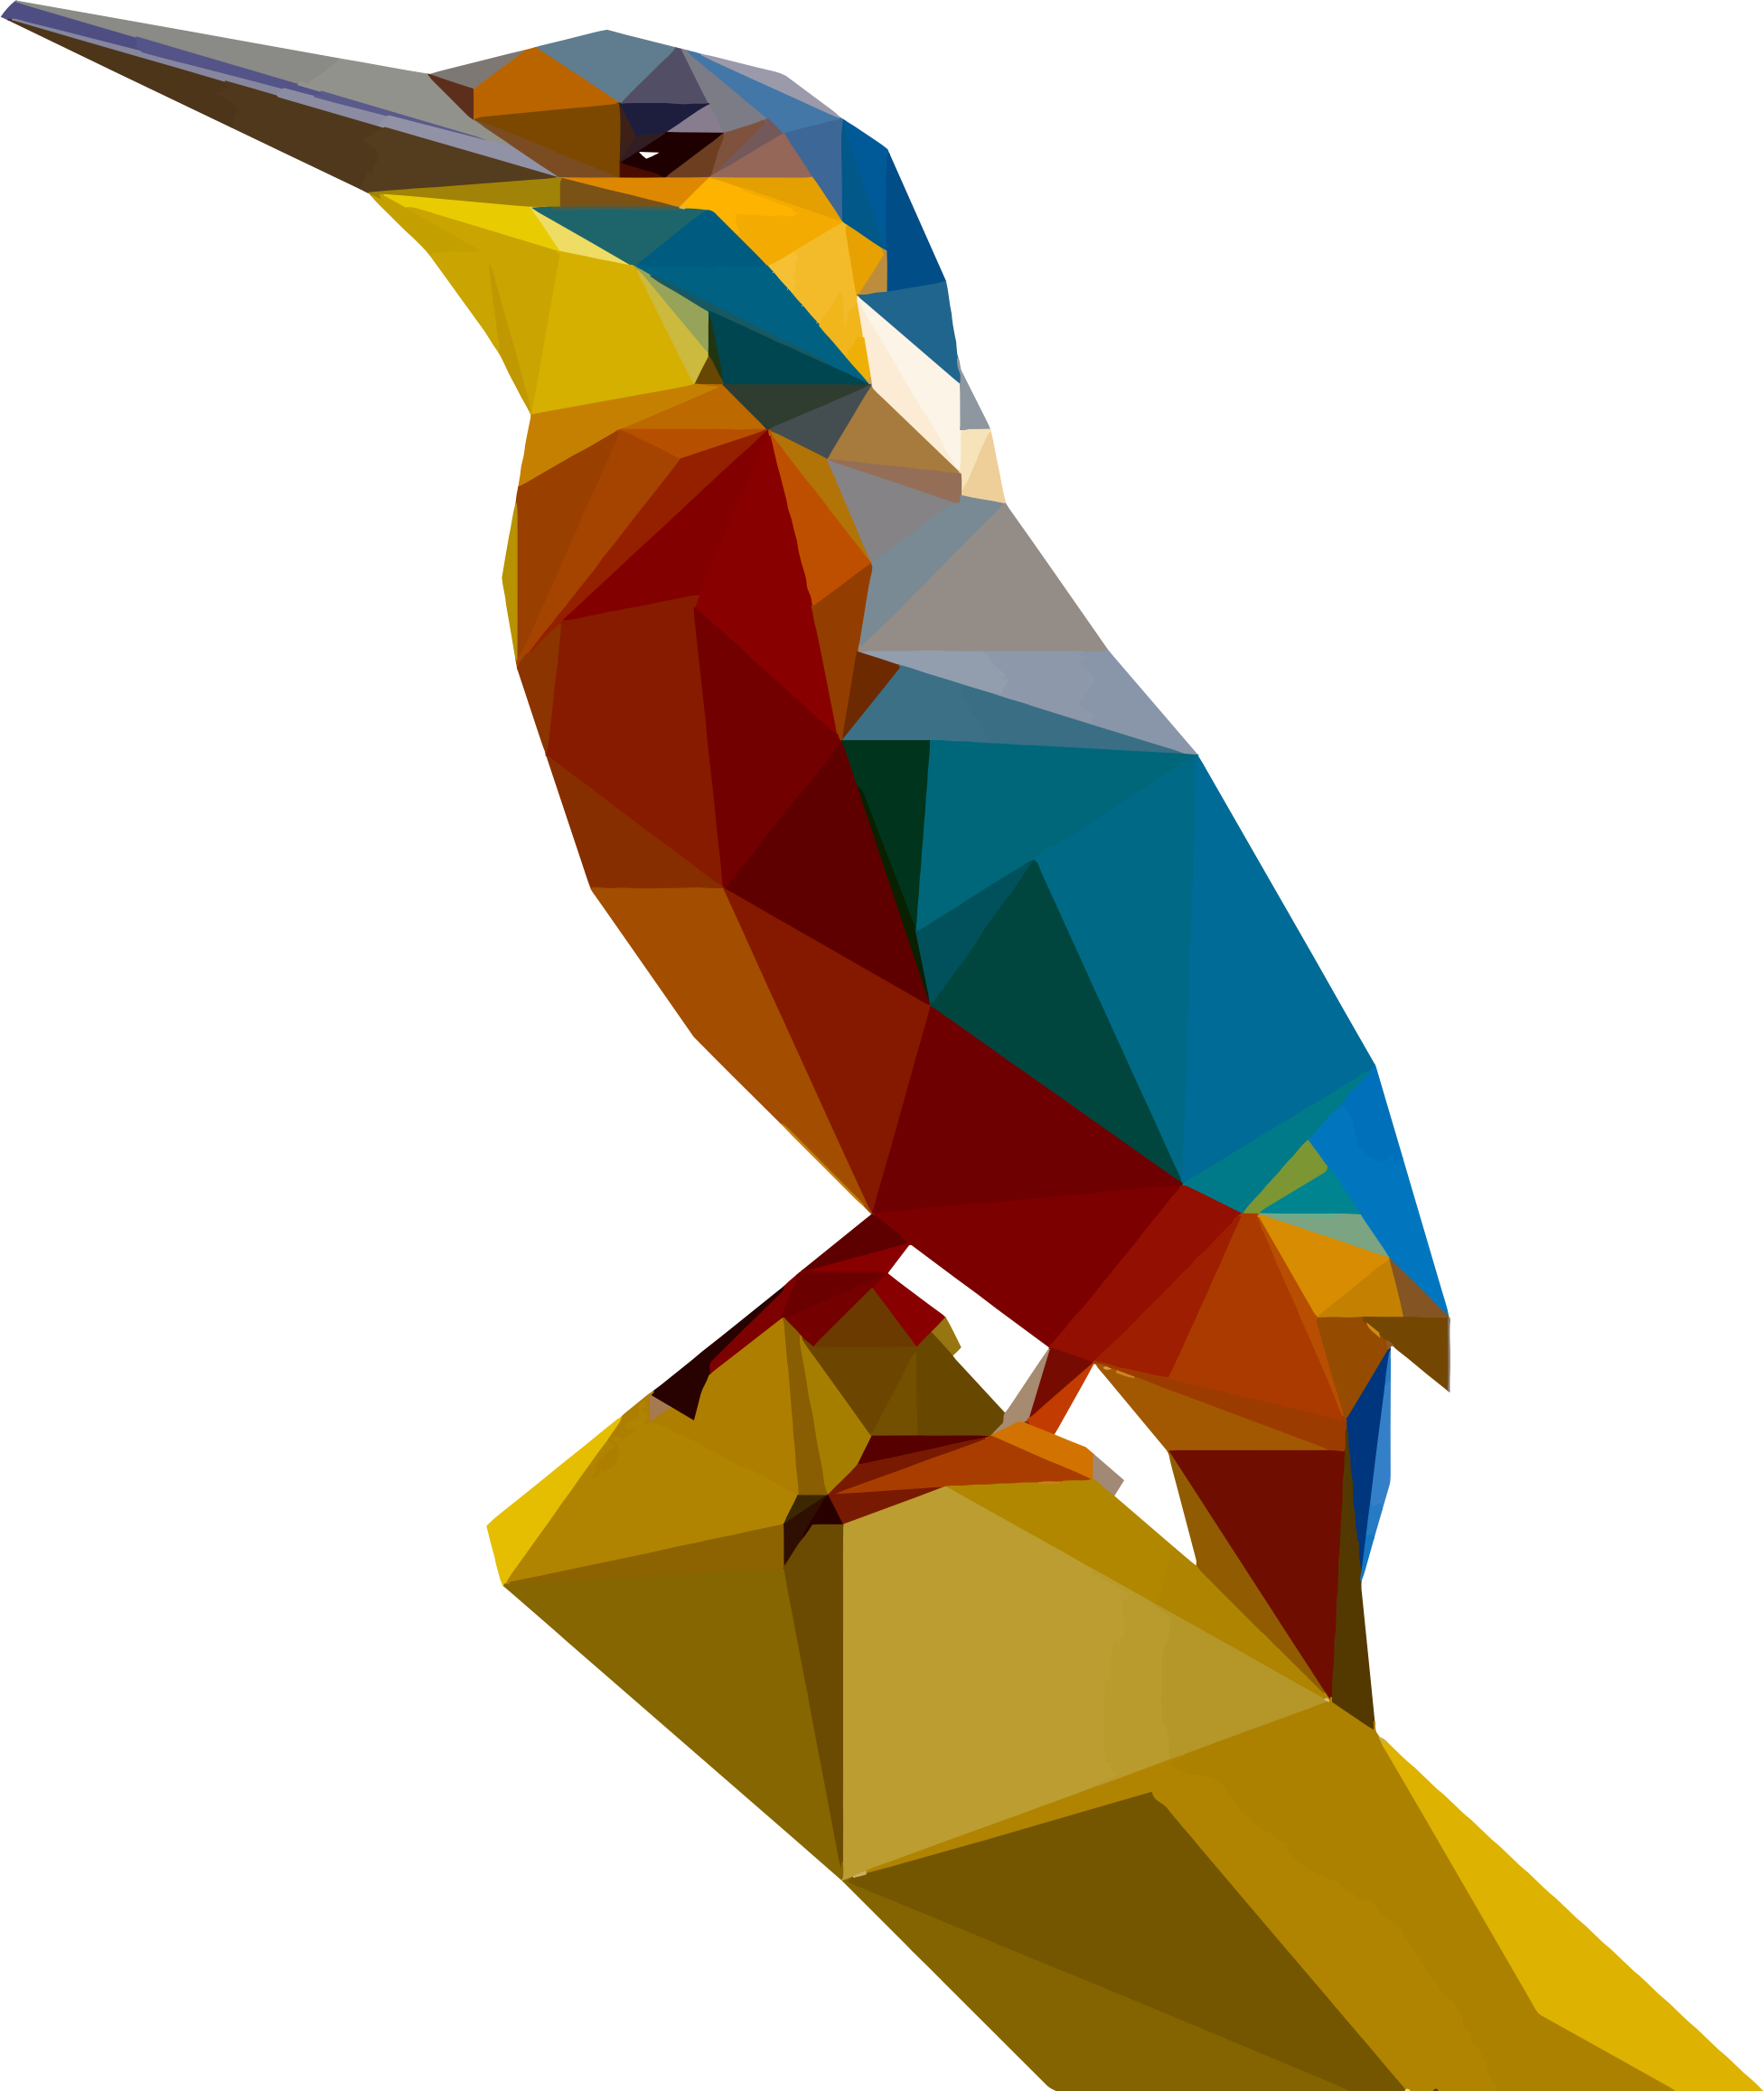 Download PNG image - Kingfisher PNG Background Image 